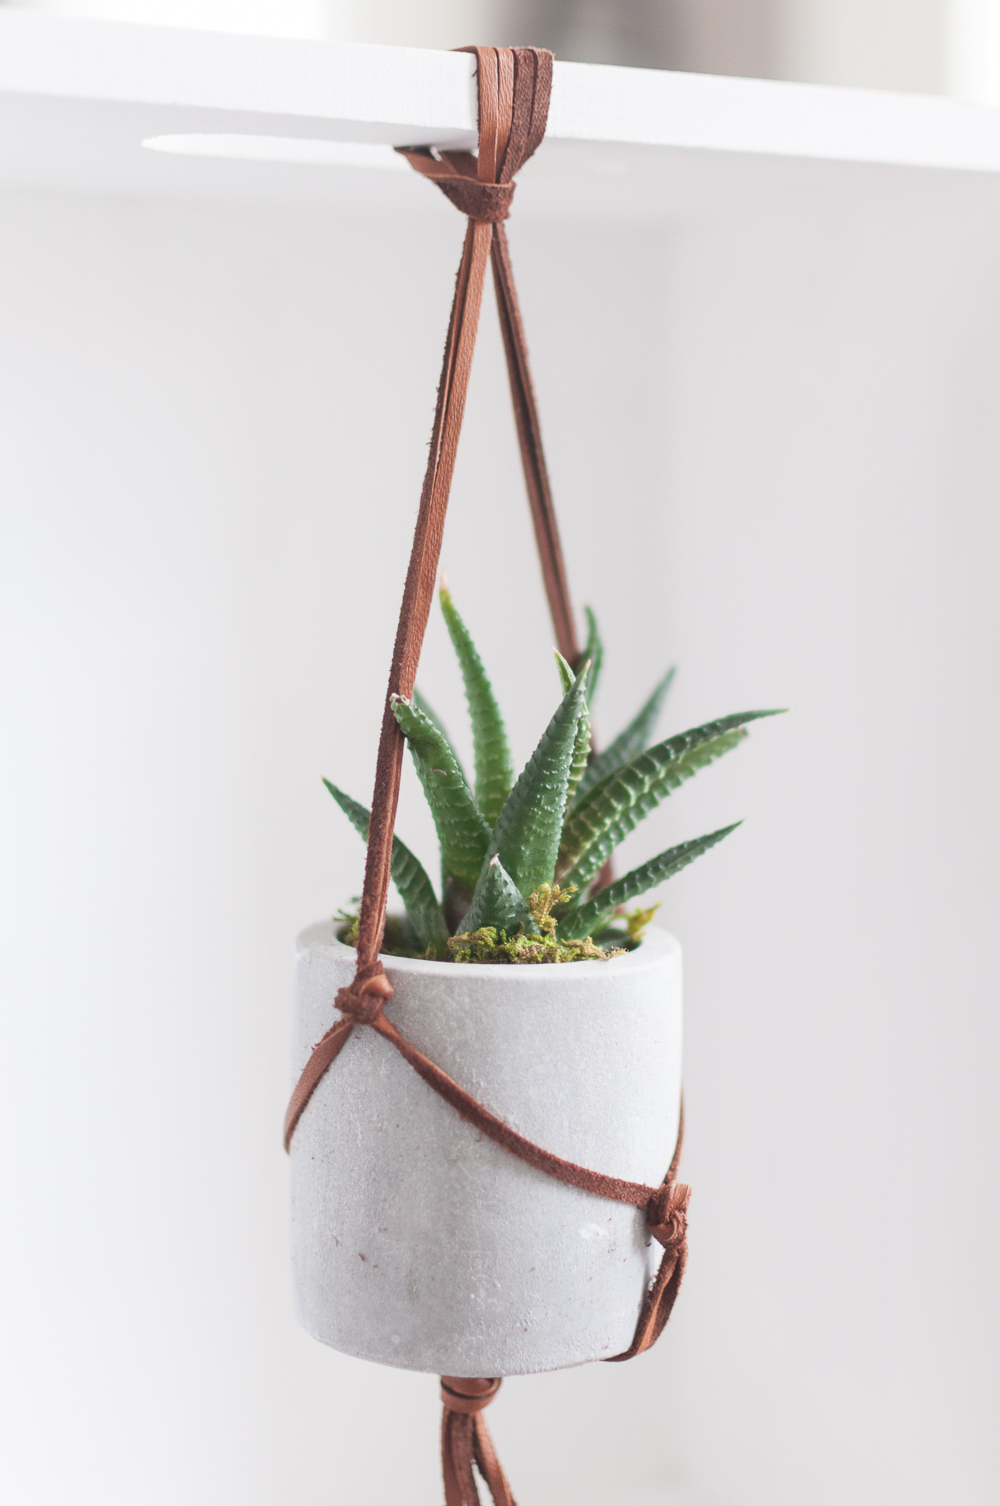 Follow this unique Leather Macrame Hanging Succulent Planter Tutorial to bring stylish natural elements into your home. Customize this Succulent Planter to fit any decor style!